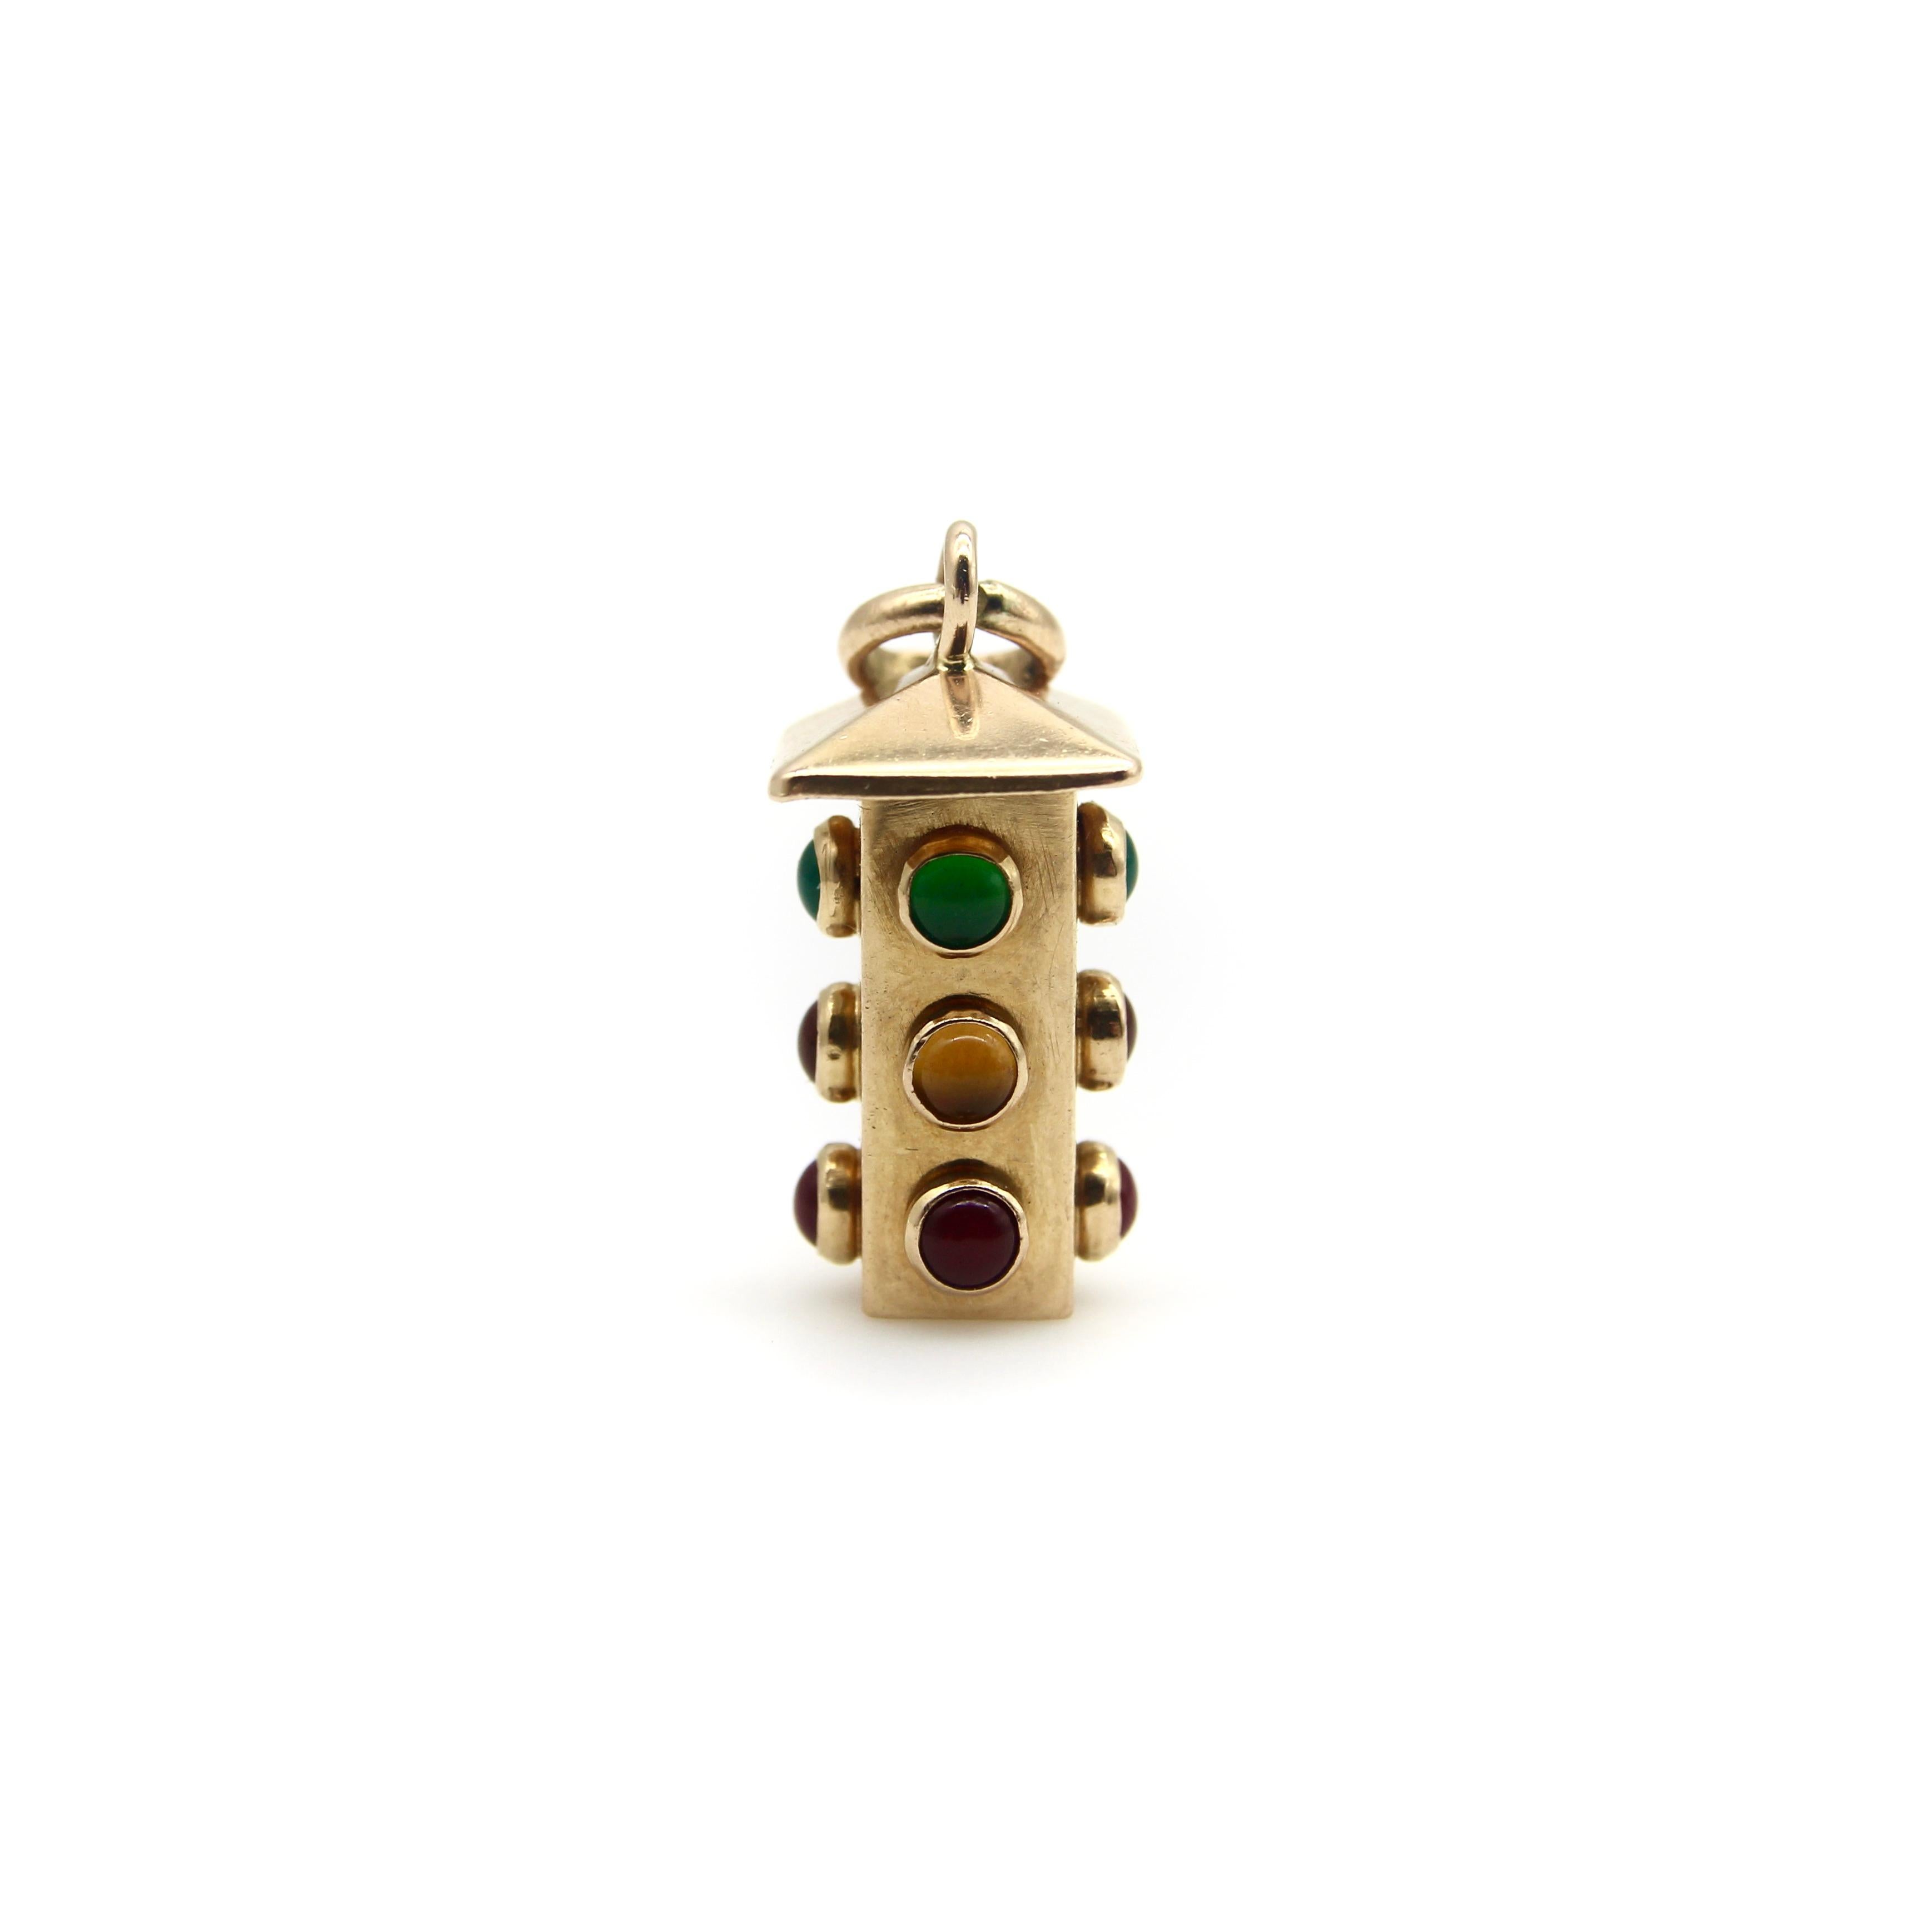 When we first found this 18k gold stoplight charm, we thought it was very cute—but it didn’t take long to notice a detail that made us love it even more. The green light comes at the top—opposite of real life stoplights which have red at the top. To